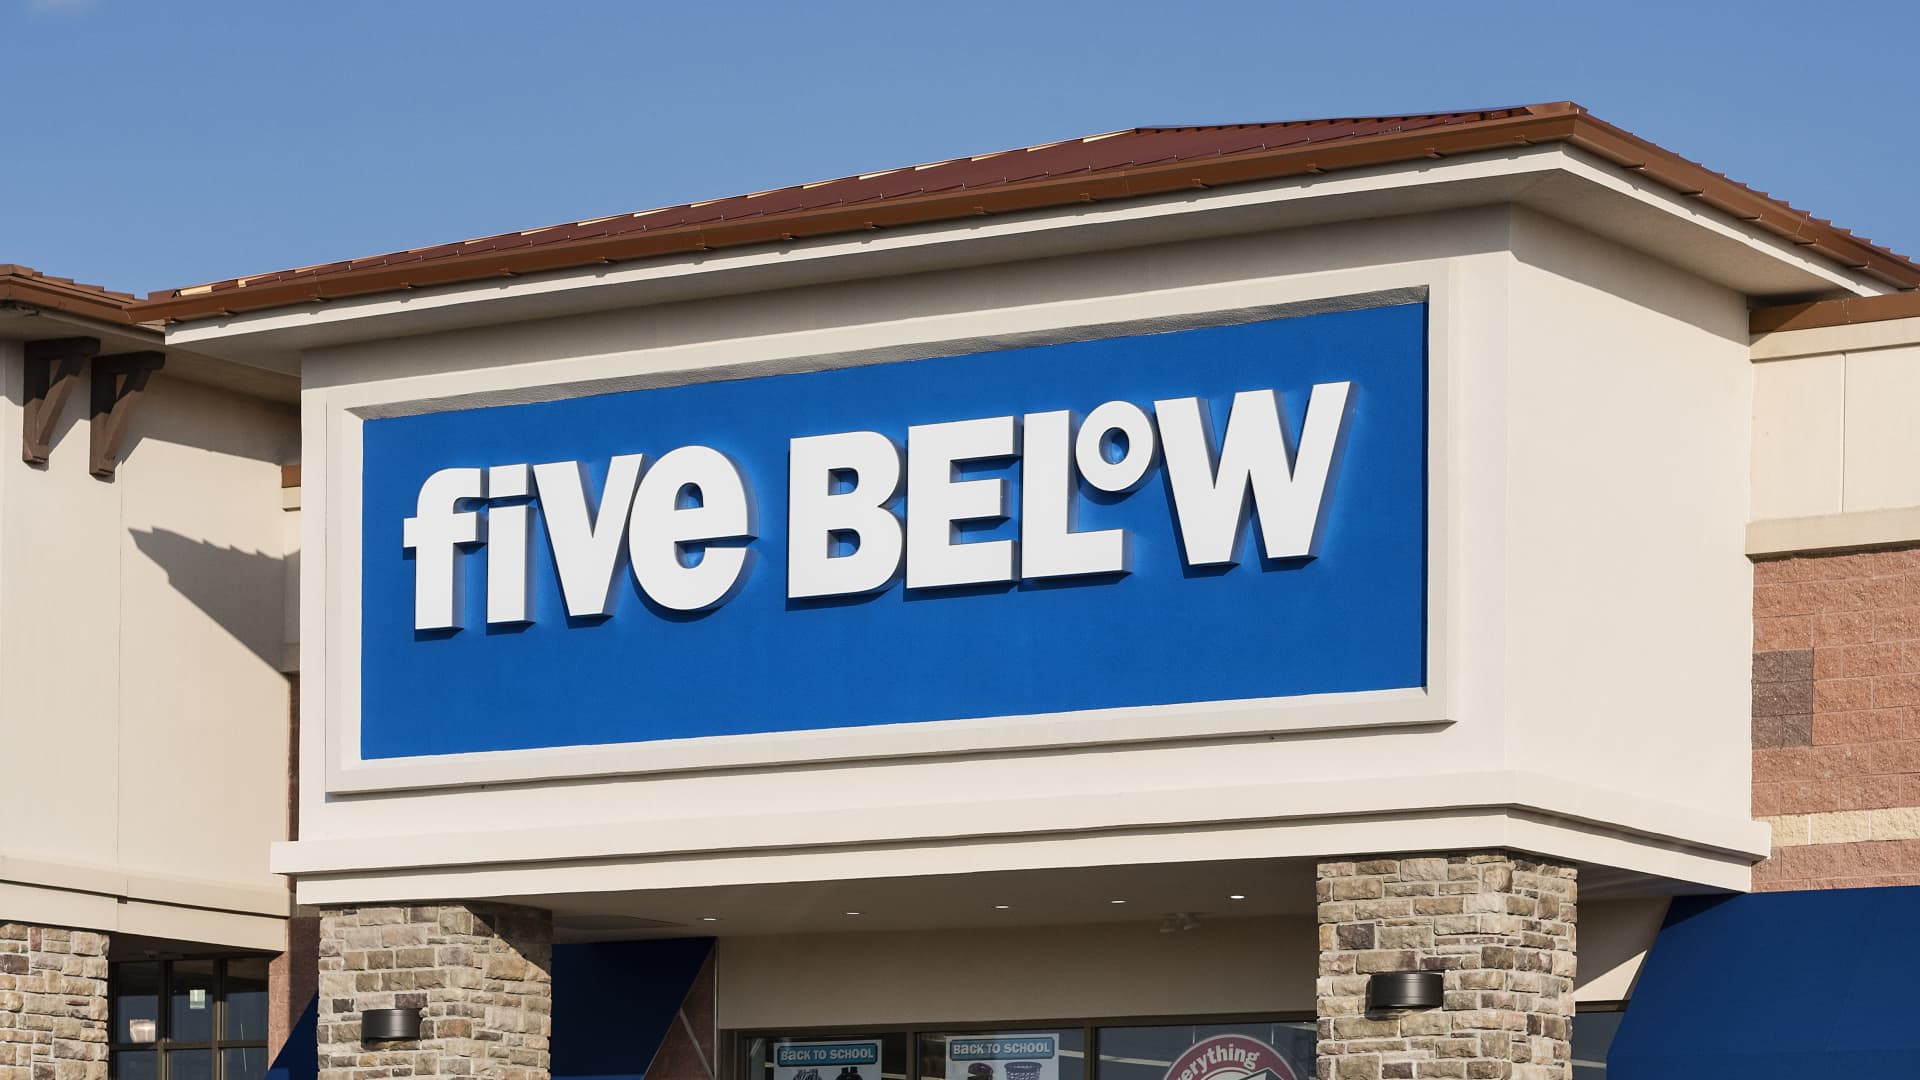 Stocks making the biggest moves midday: Five Below, Salesforce, Lululemon, Instacart and more